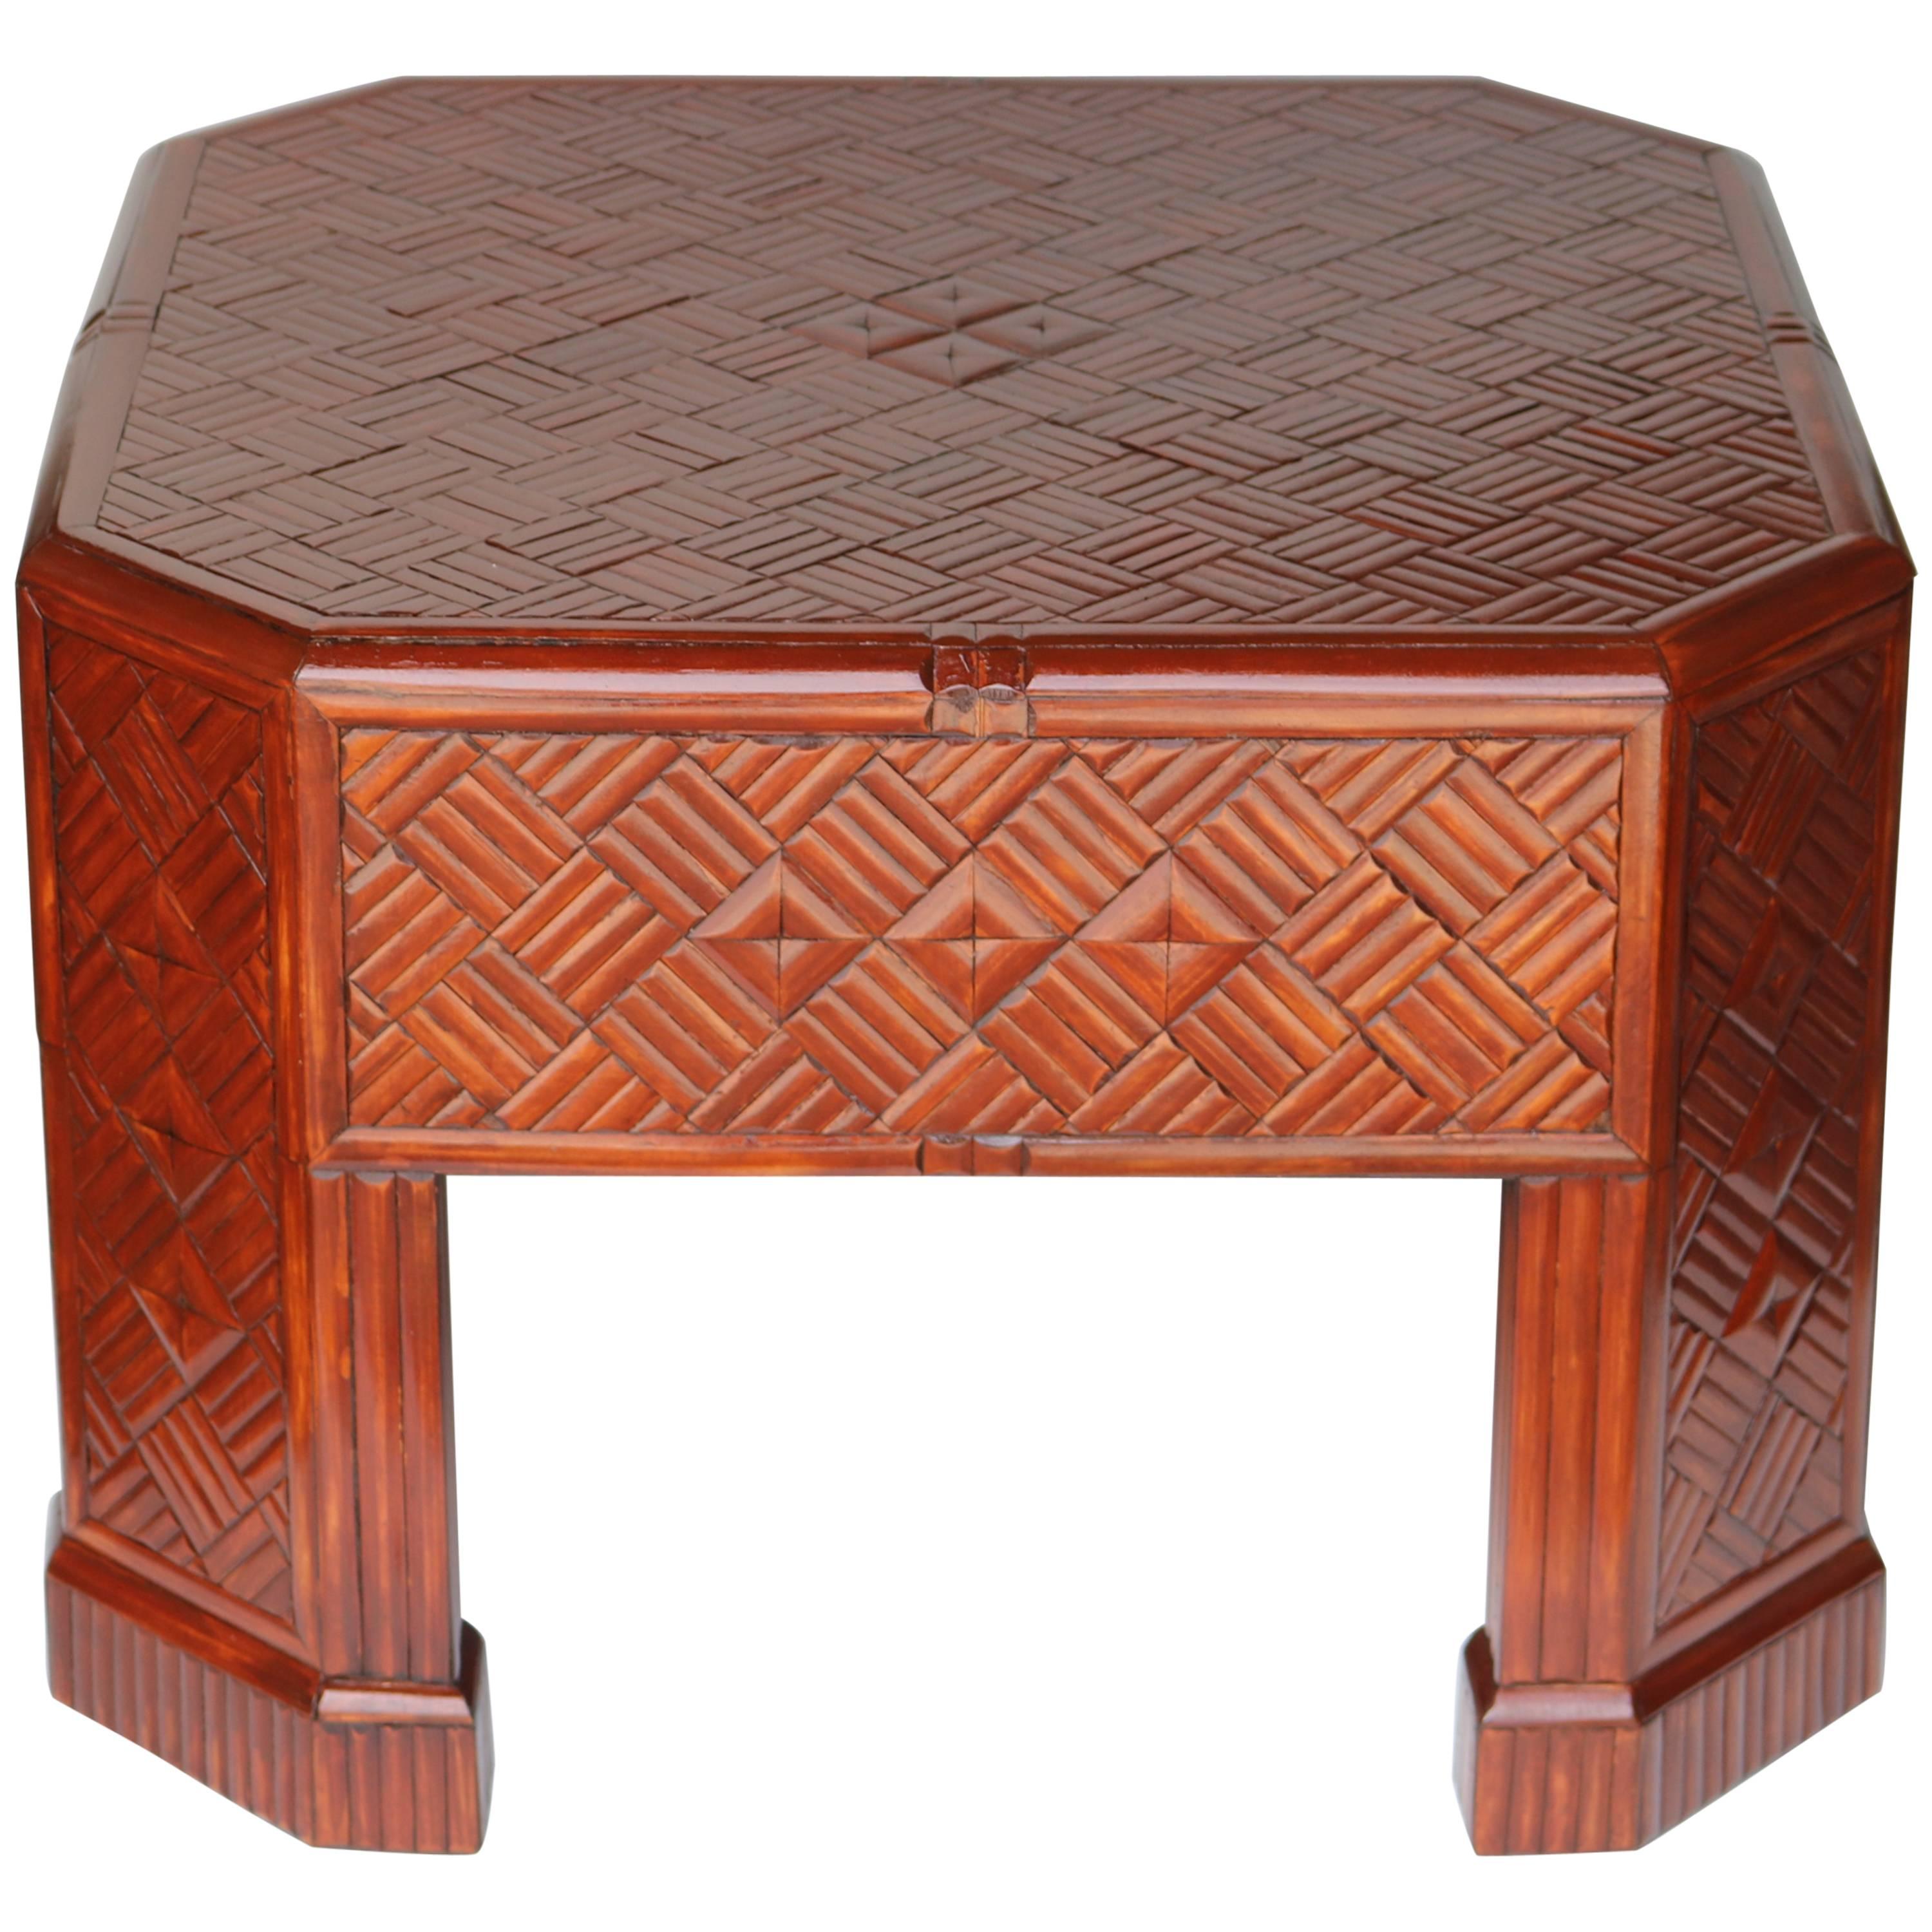 Bamboo Cocktail Table Diagonal Parquetry Inlay Pattern For Sale